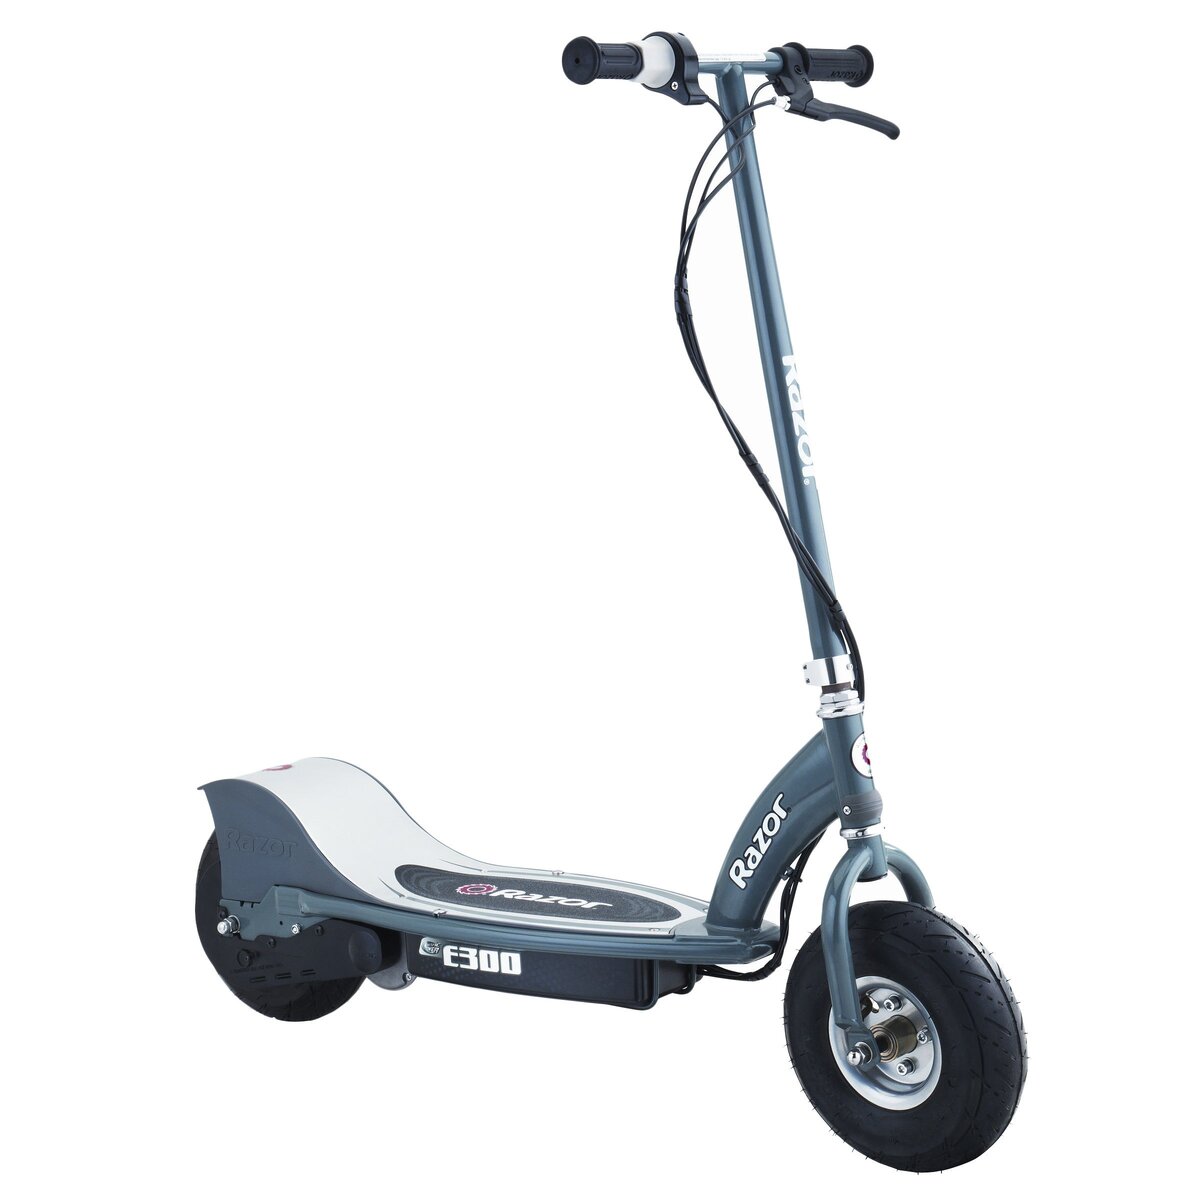 https://www.overstock.com/Sports-Toys/Razor-E300-Grey-Plastic-Electric-Scooter/8124124/product.html